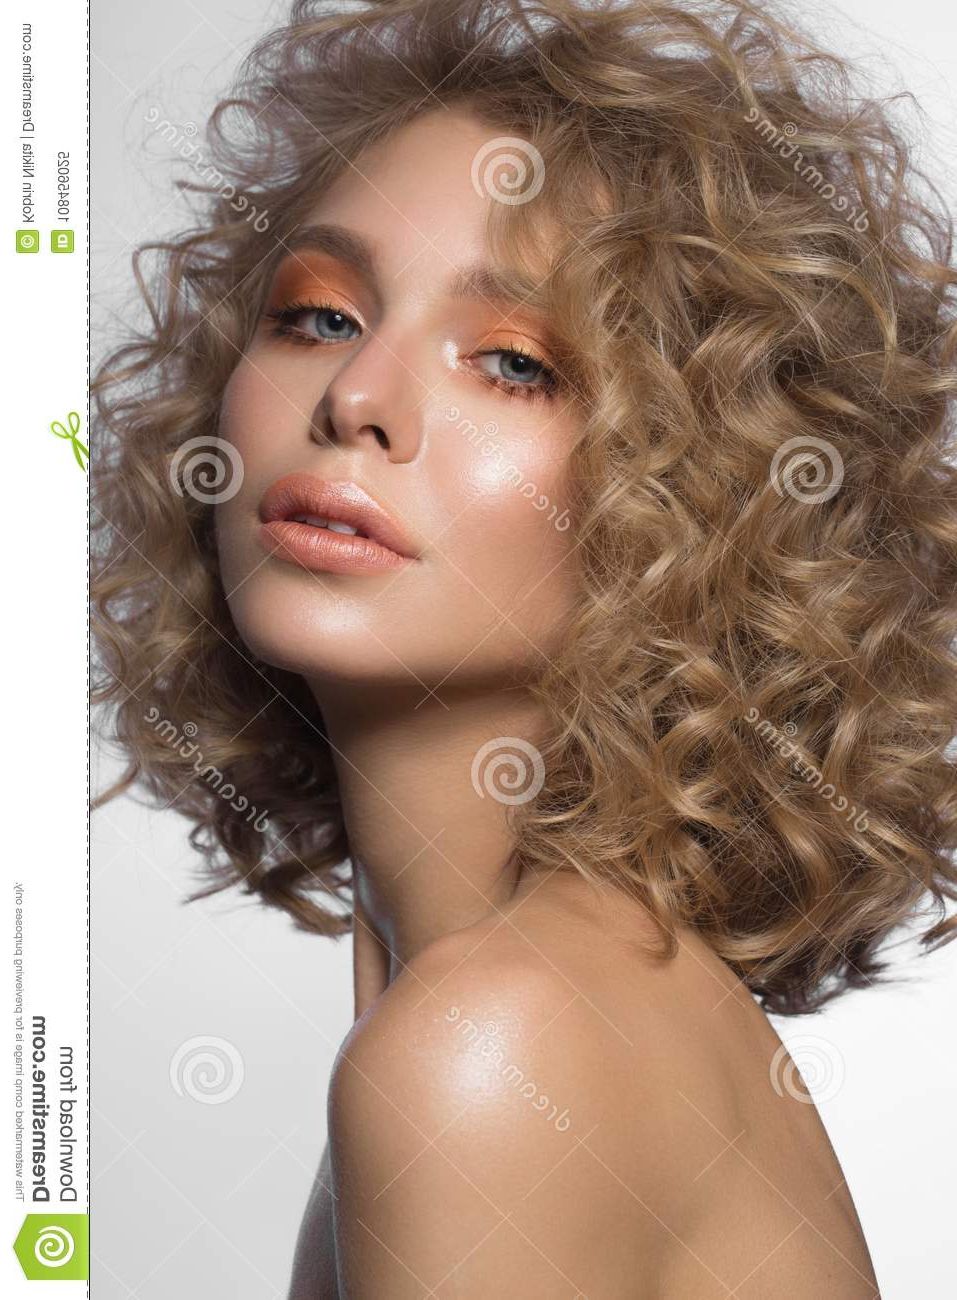 Beautiful Blonde Girl With Curls And Gentle Make Up (View 13 of 20)